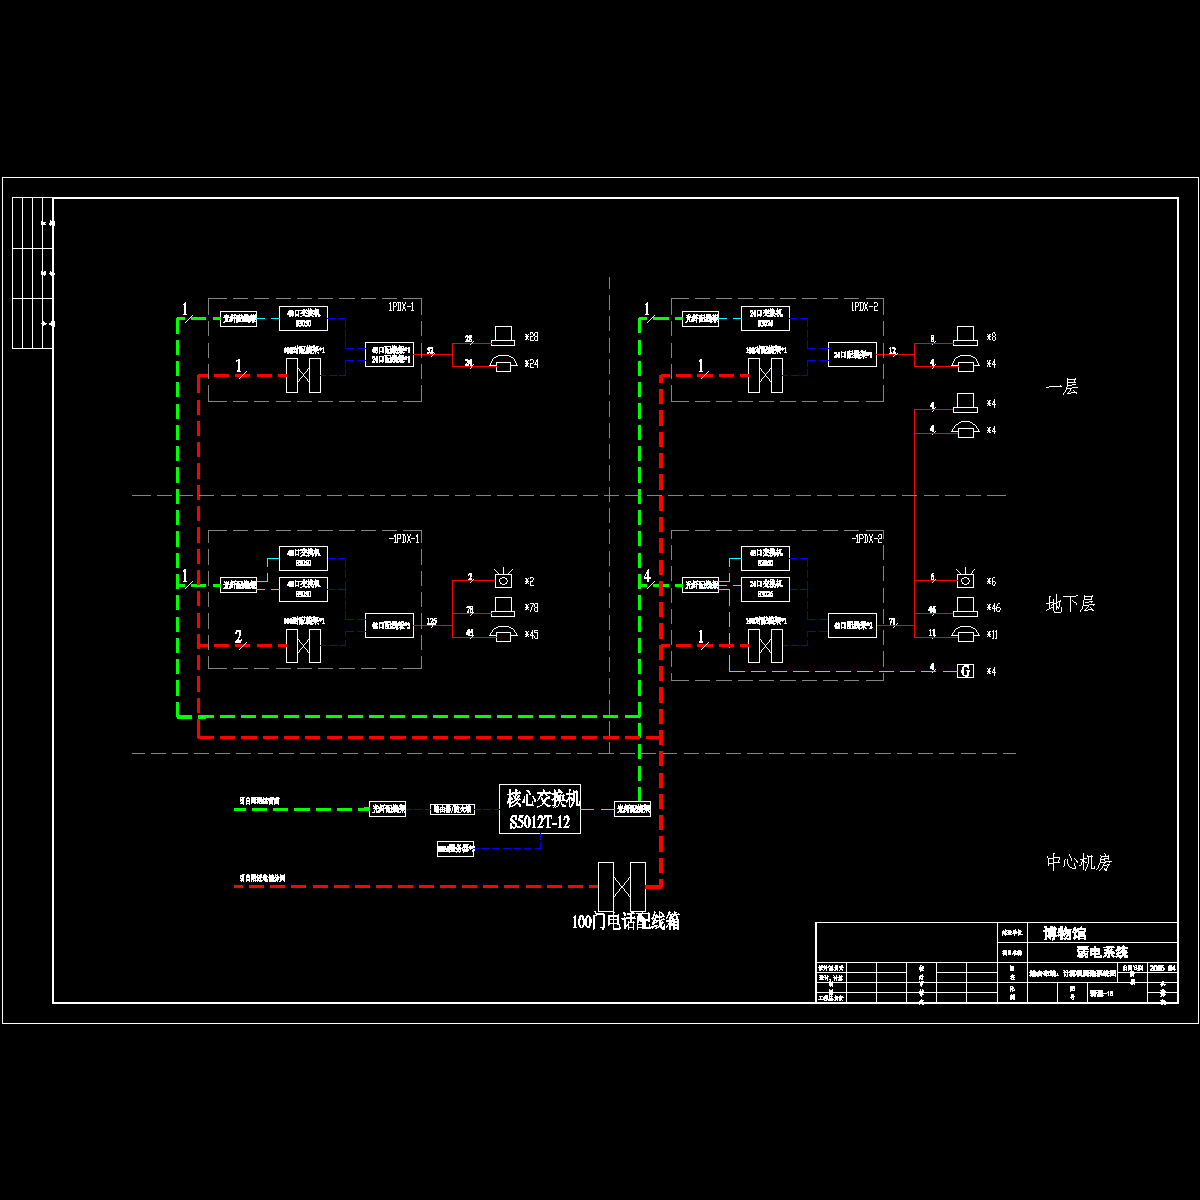 pds-sys18.dwg